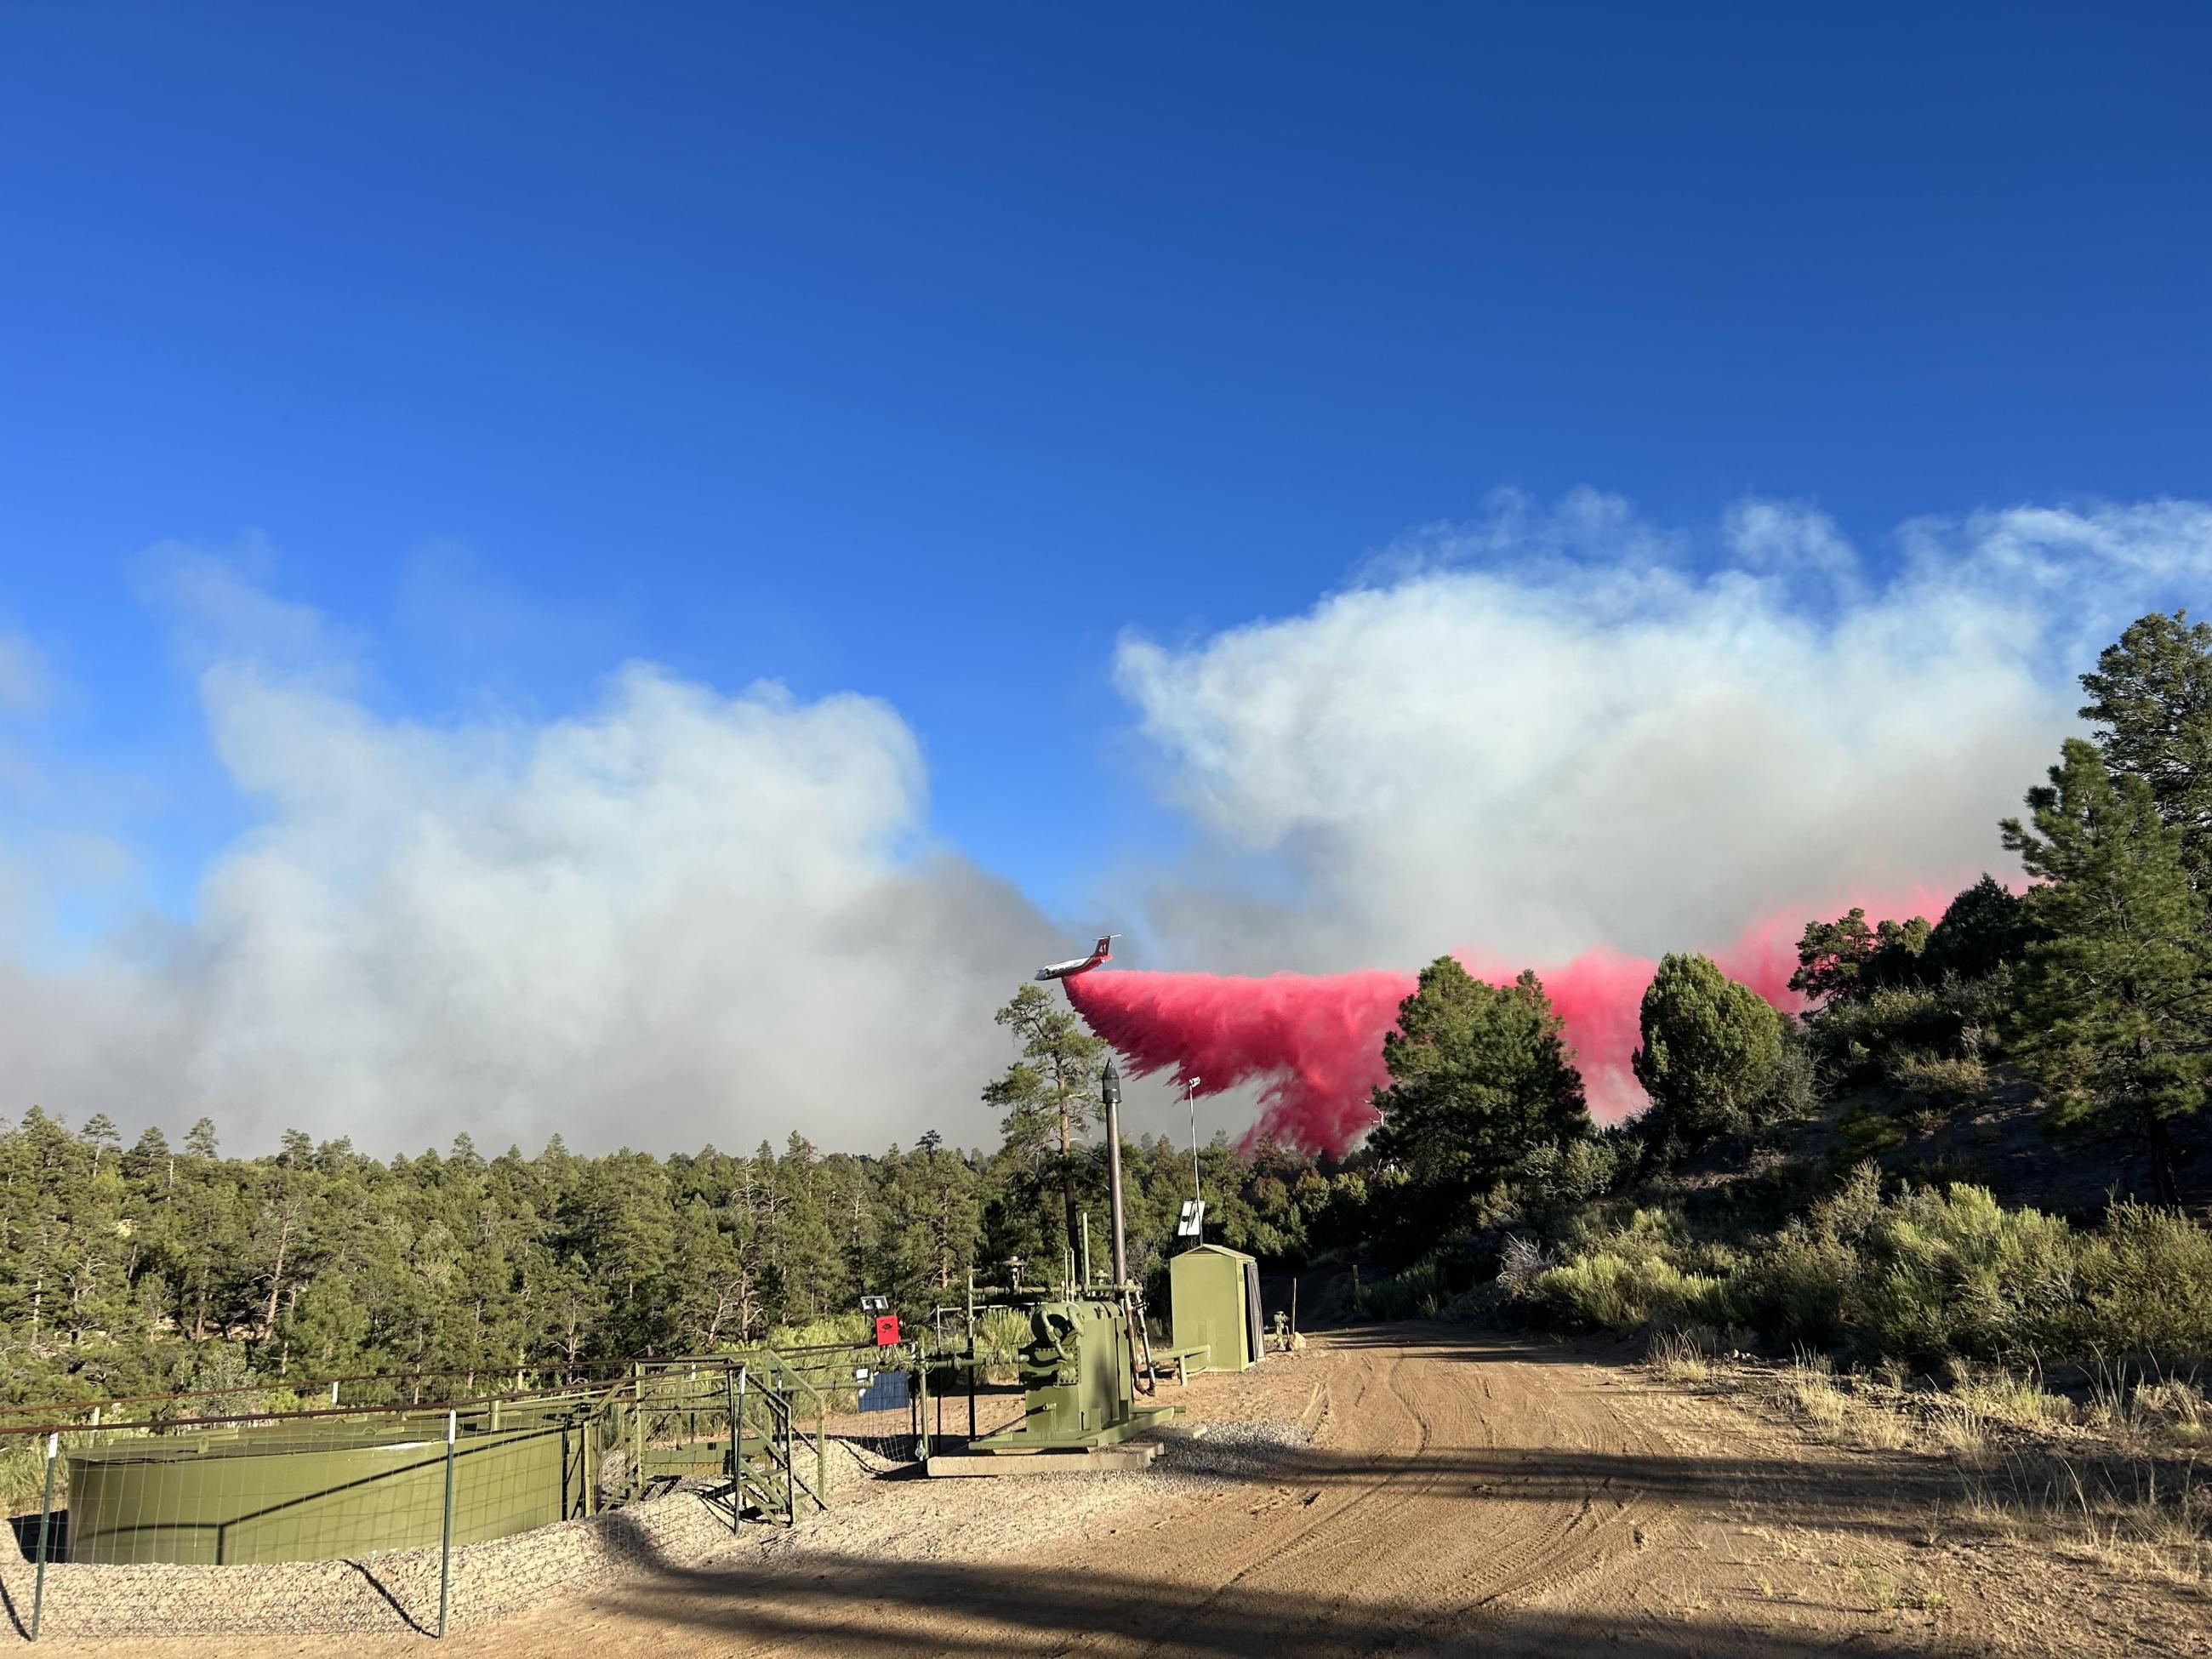 A very large airtanker drops retardant on a area where smoke is rising.